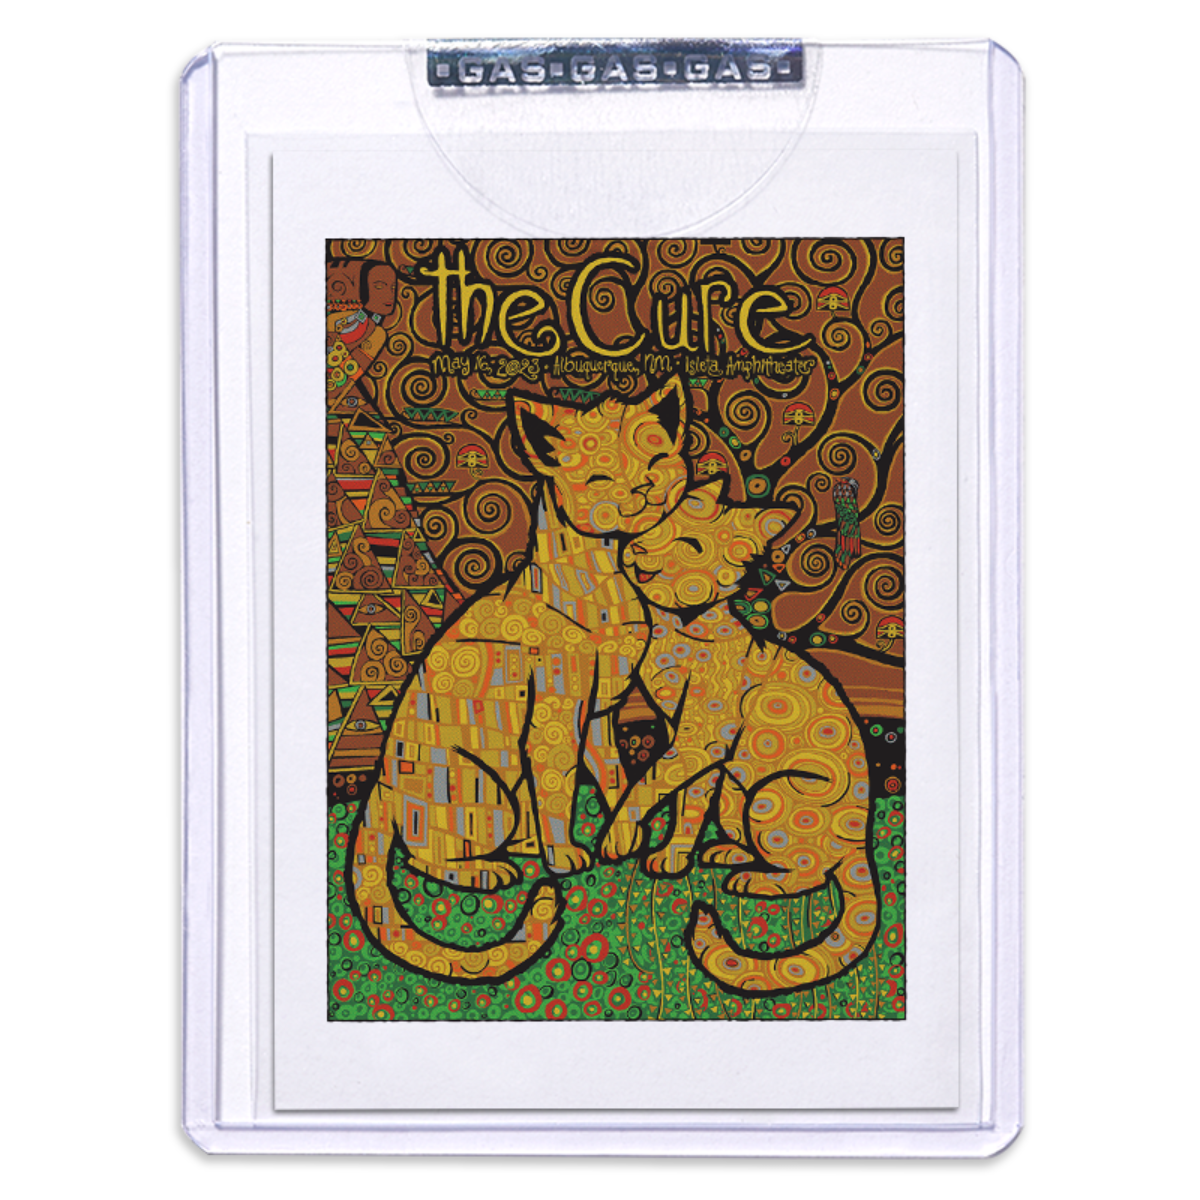 GAS The Cure May 16, 2023, Albuquerque, NM Trading Card by Todd Slater